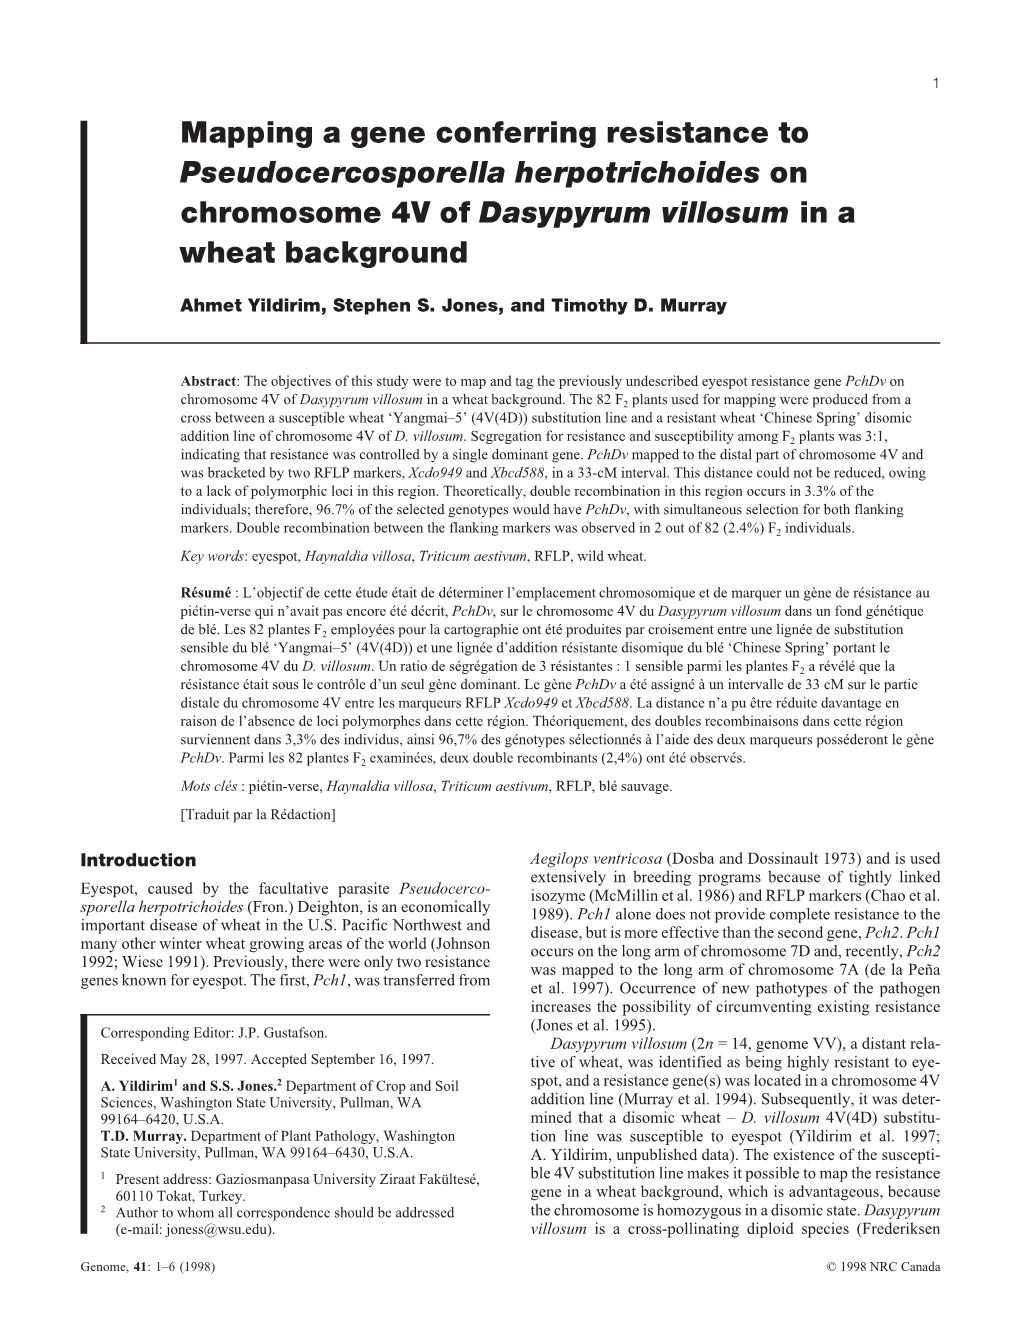 Mapping a Gene Conferring Resistance to Pseudocercosporella Herpotrichoides on Chromosome 4V of Dasypyrum Villosum in a Wheat Background